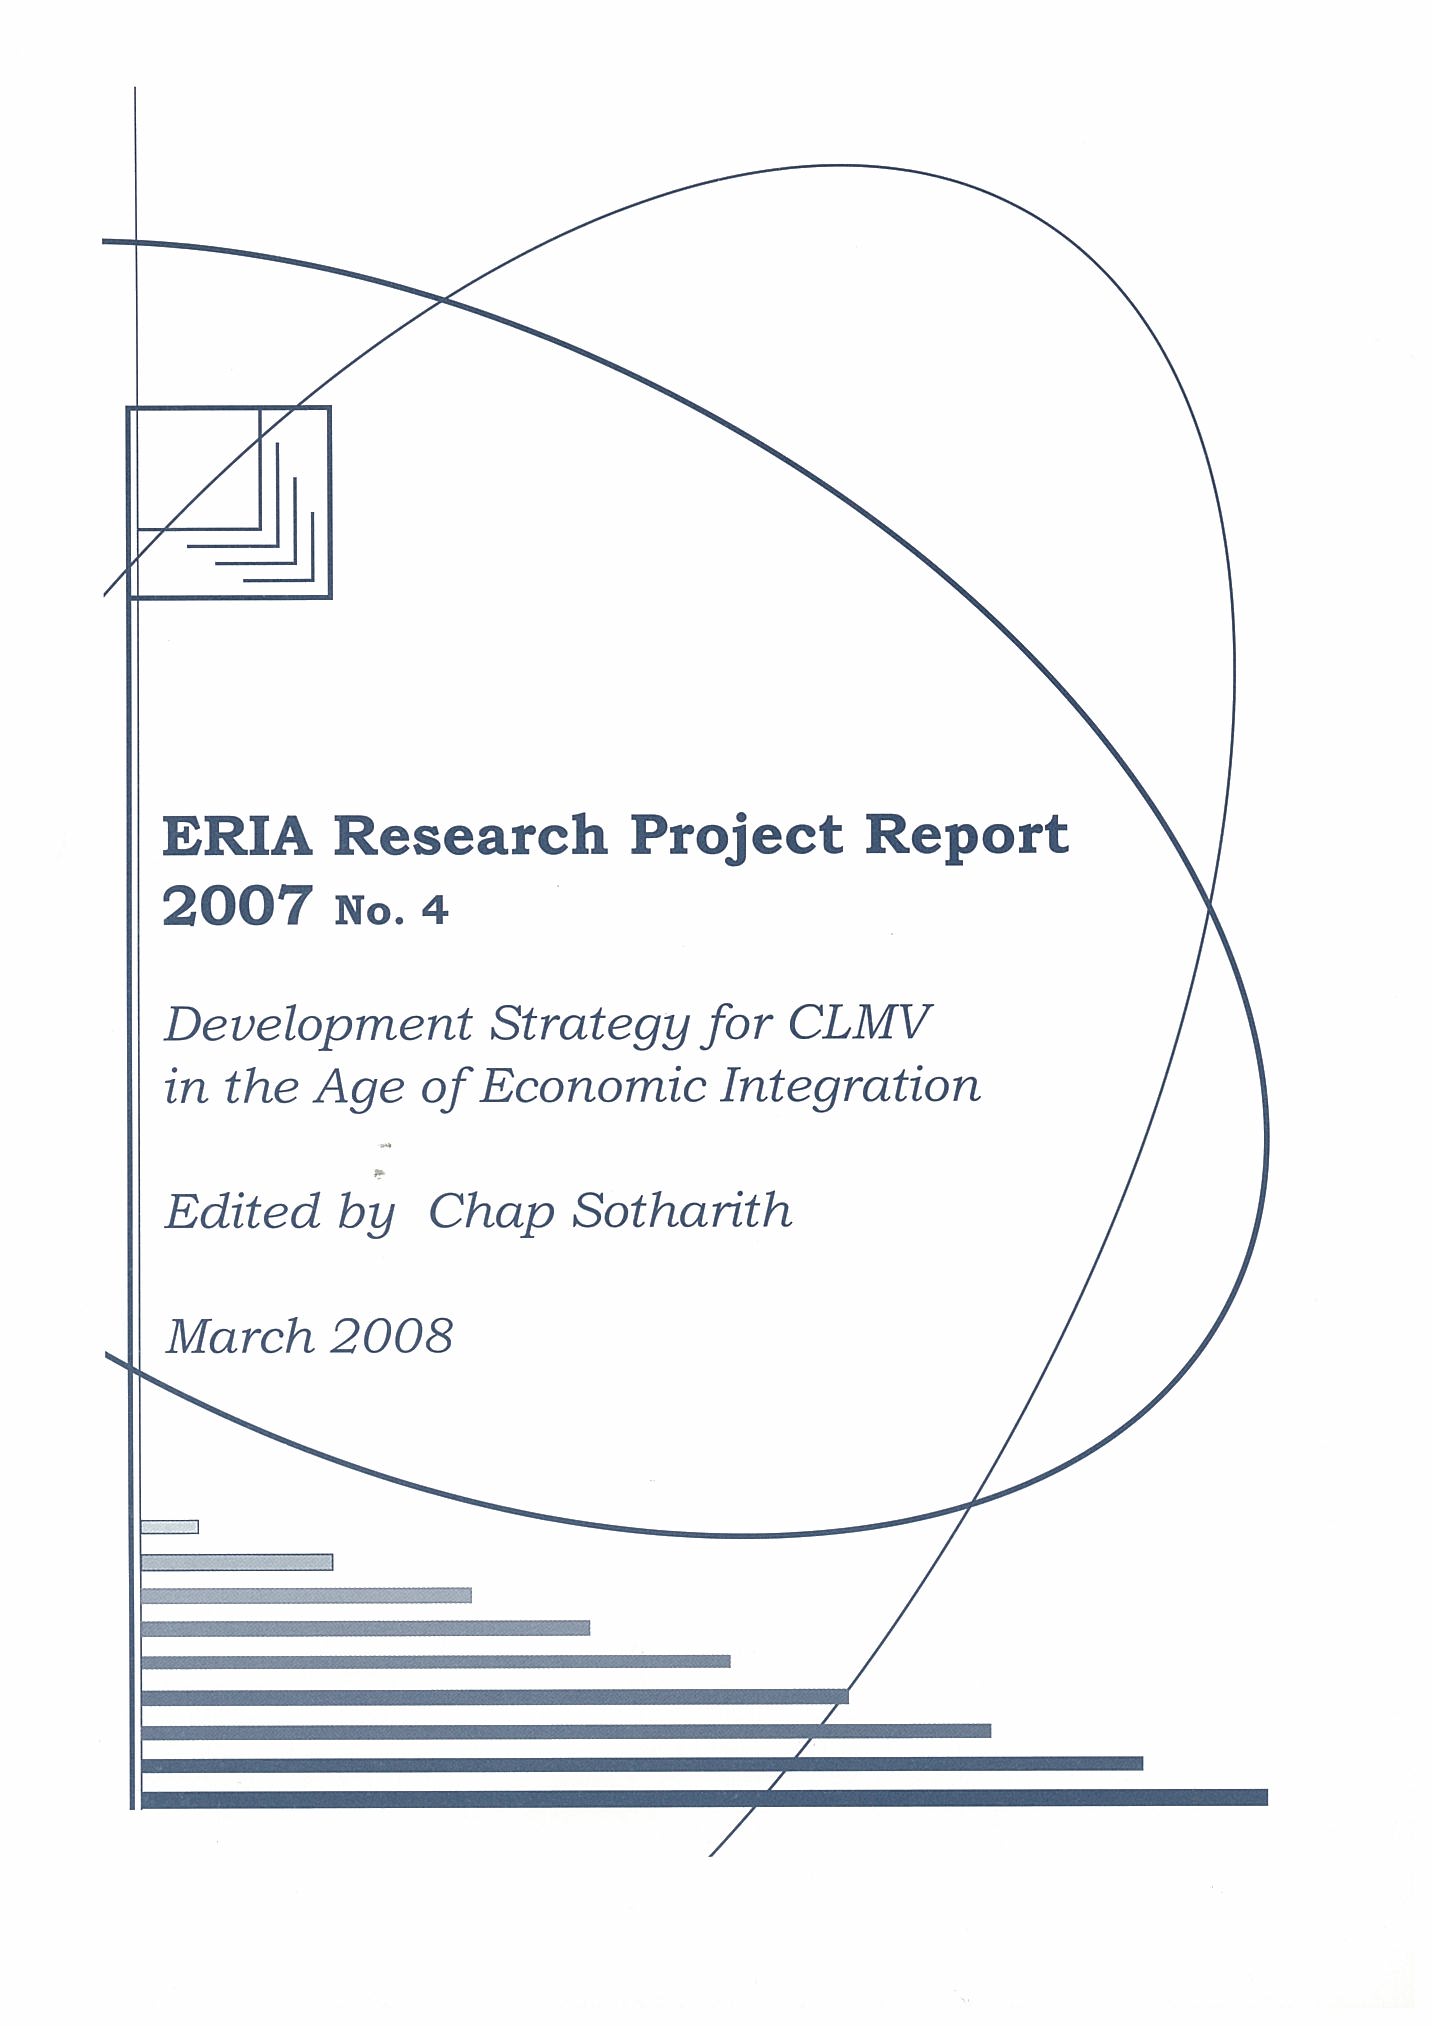 Development Strategy for CLMV in the Age of Economic Integration